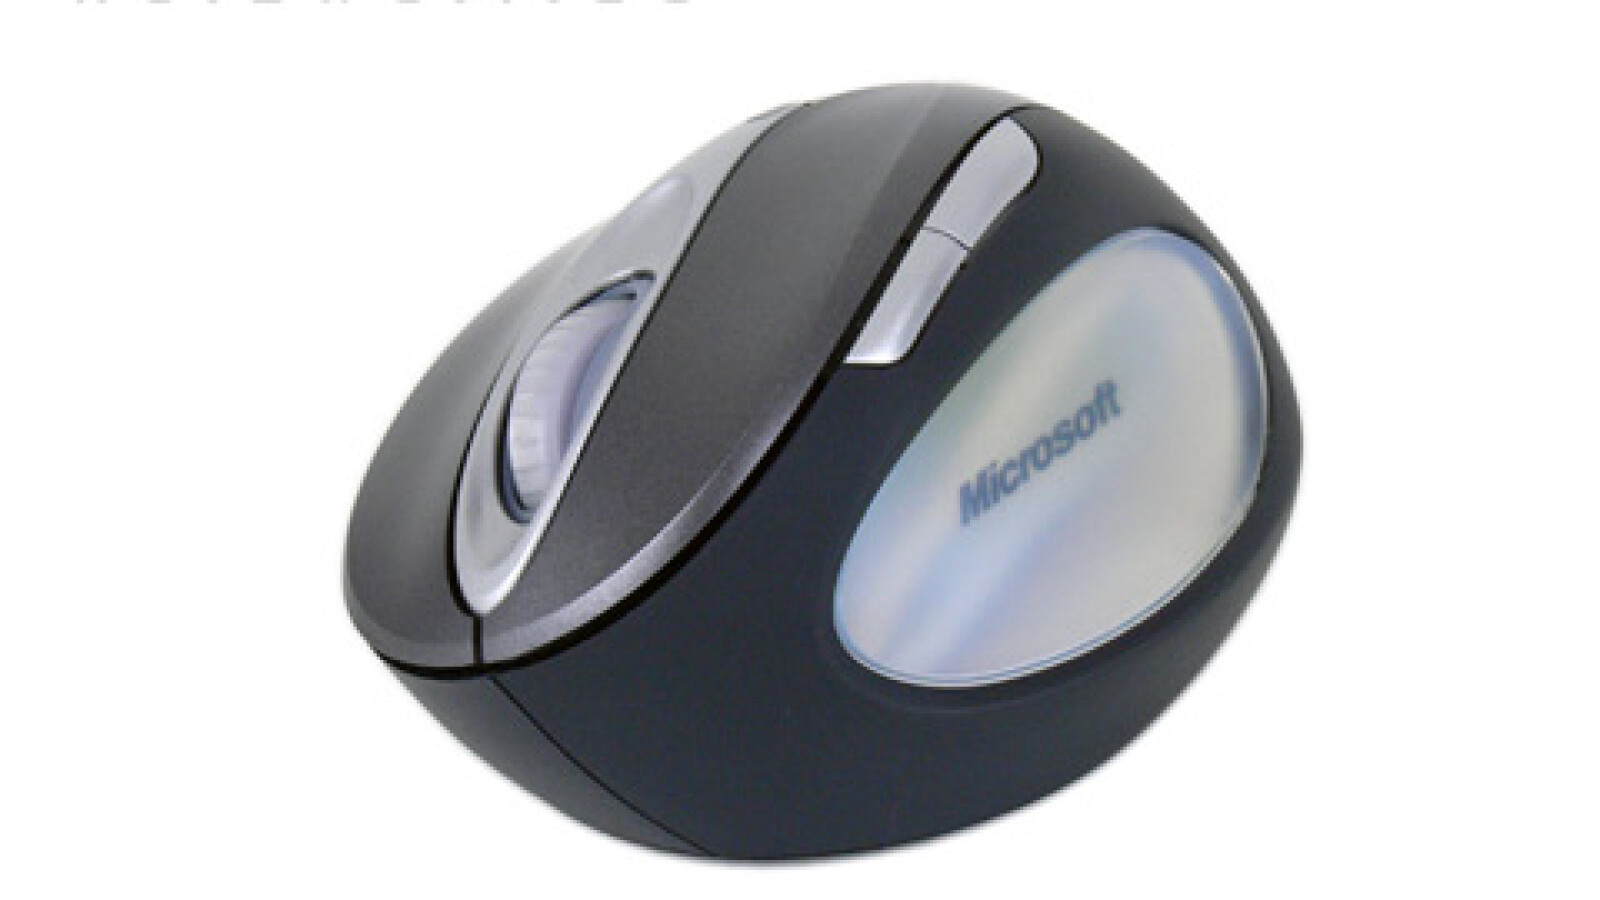 microsoft natural wireless laser mouse